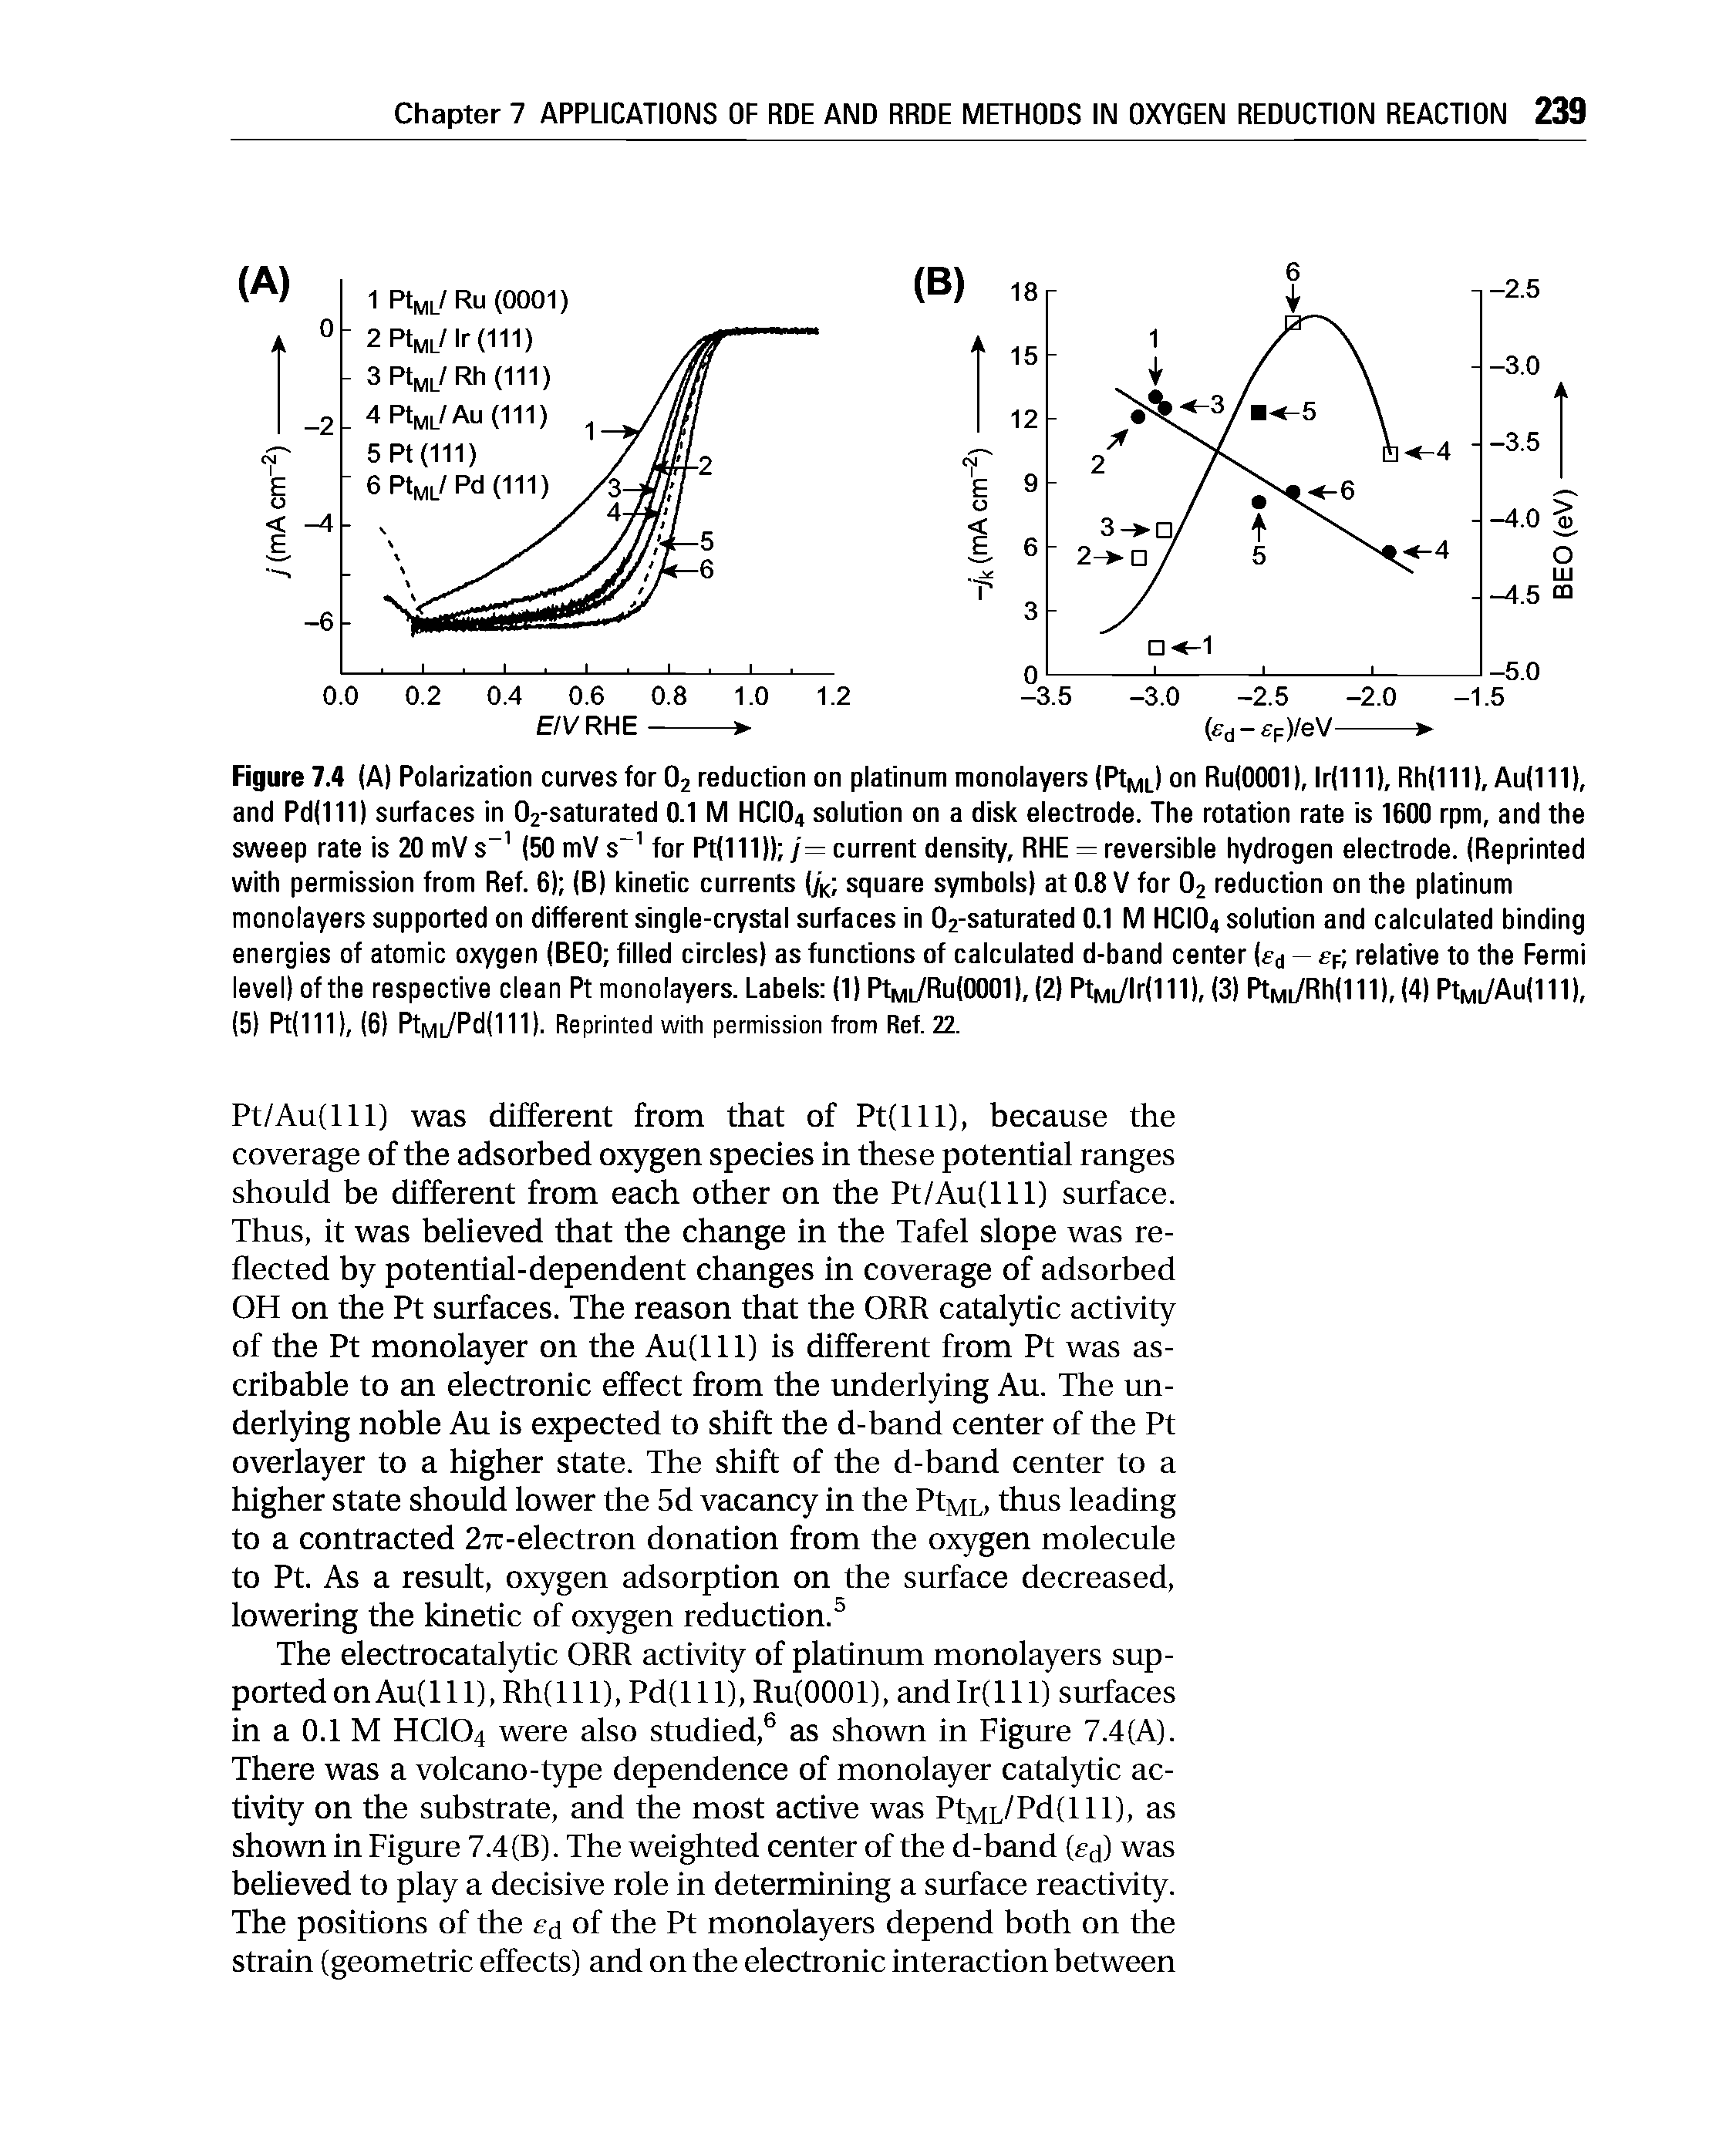 Figure 7.4 (A) Polarization curves for O2 reduction on platinum monolayers (PIml) on Ru(OOOI), lr(111), Rh(111), Au(111), and Pd(111) surfaces in 02-saturated 0.1 M HCIO4 solution on a disk electrode. The rotation rate is 1600 rpm, and the sweep rate is 20 mV s (50 mV s for R(111)) y= current density, RHE = reversible hydrogen electrode. (Reprinted with permission from Ref. 6) (B) kinetic currents (yi< square symbols) at 0.8 V for O2 reduction on the platinum monolayers supported on different single-crystal surfaces in 02-saturated 0.1 M HCIO4 solution and calculated binding energies of atomic oxygen (BEO filled circles) as functions of calculated d-band center (fd cp relative to the Fermi level) of the respective clean Pt monolayers. Labels (1) PtMi/Ru(0001),(2) RMi/lrOU). (3) PtMi/Rh(111),(4) PtMi/Au(111), (5) Pt(111), (6) PtML/Pd(111). Reprinted with permission from Ref. 22.